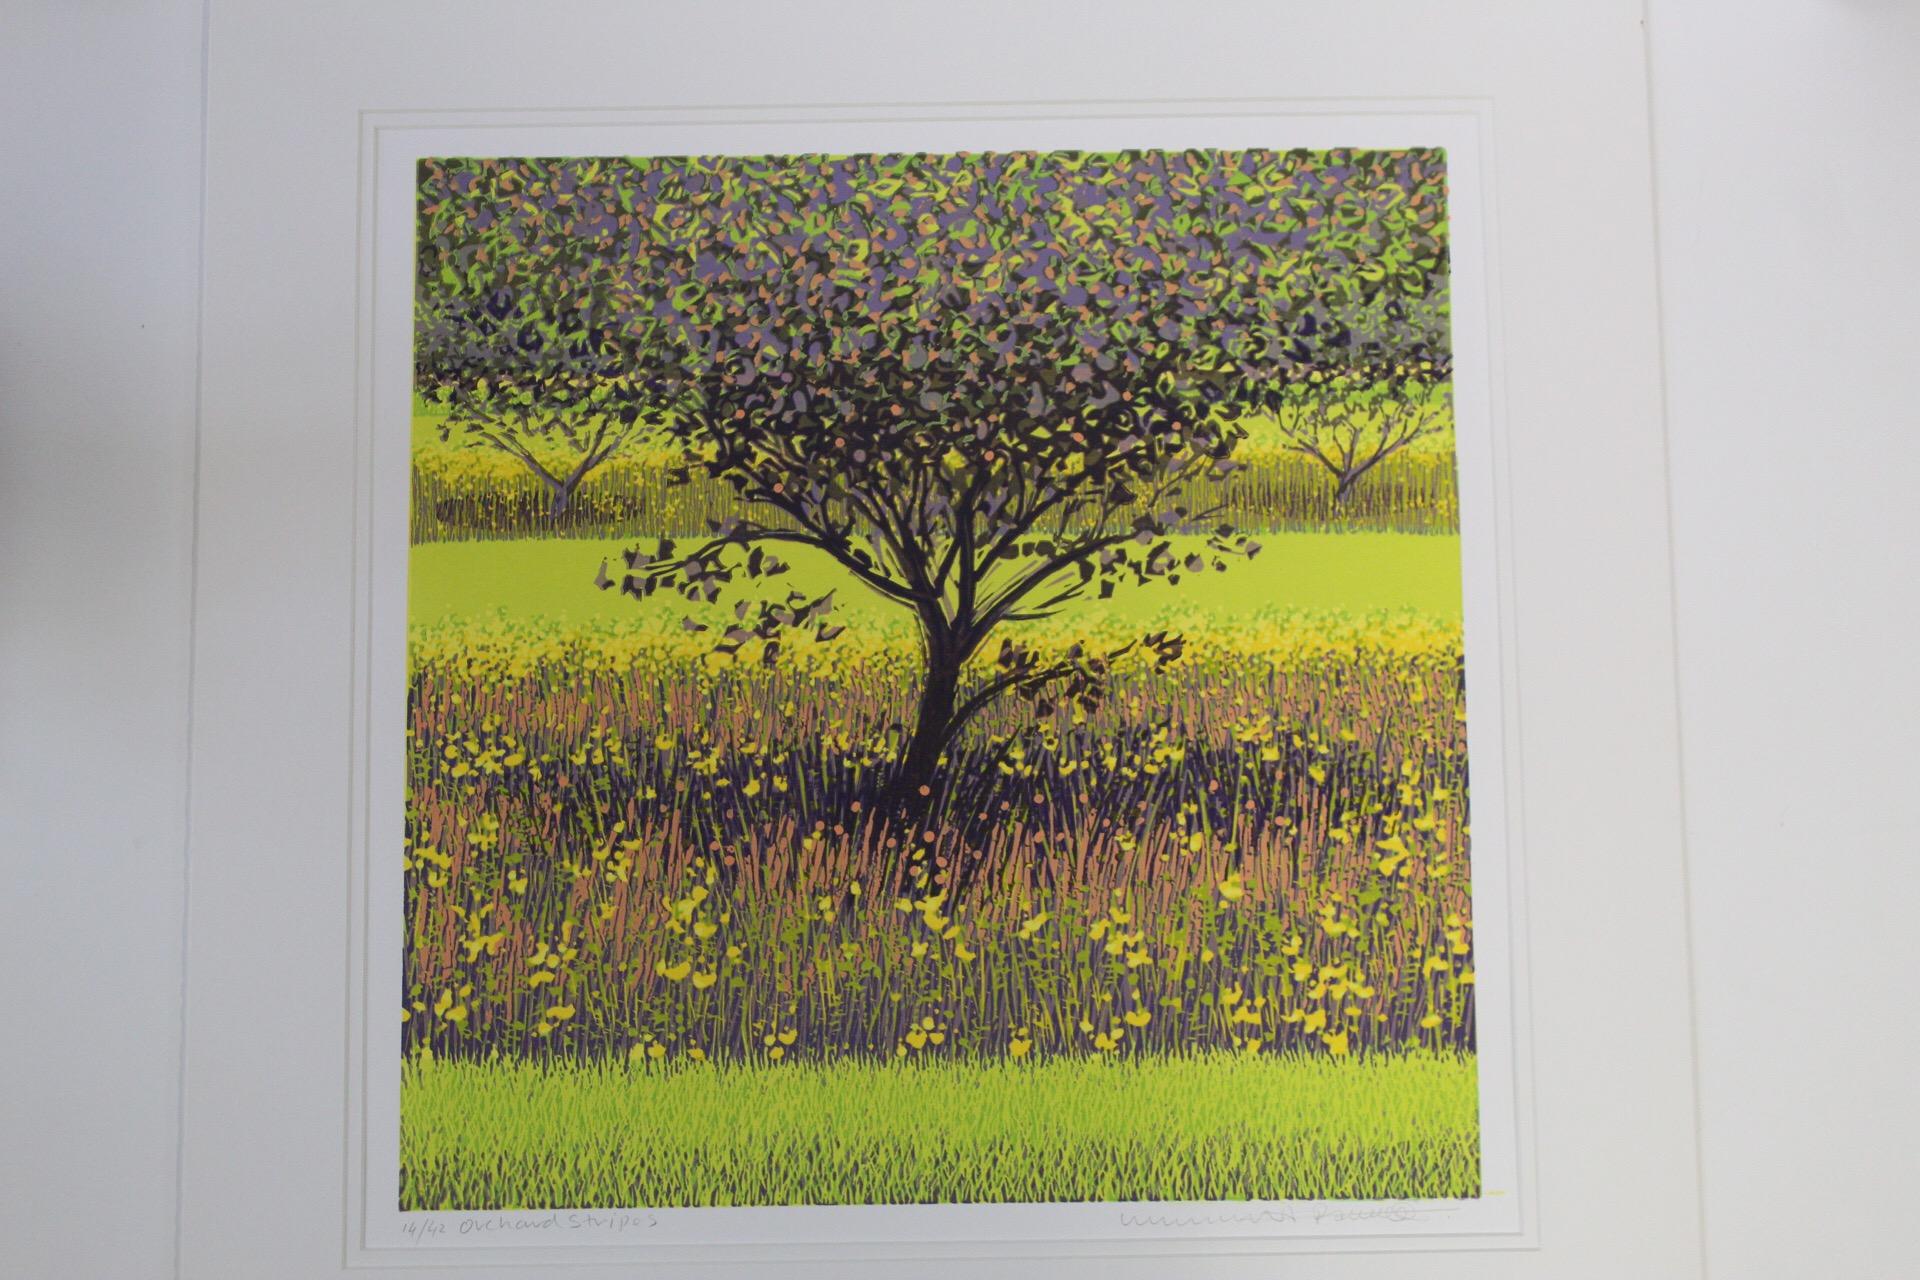 Mark A Pearce
Orchard Stripes
Limited Edition Linocut Print
Edition of 42
Artwork Size: H 40cm x W 40cm x D 0.5cm
Sold Unframed
Please note that in situ images are purely an indication of how a piece may look.

Orchard Stripes is a limited edition